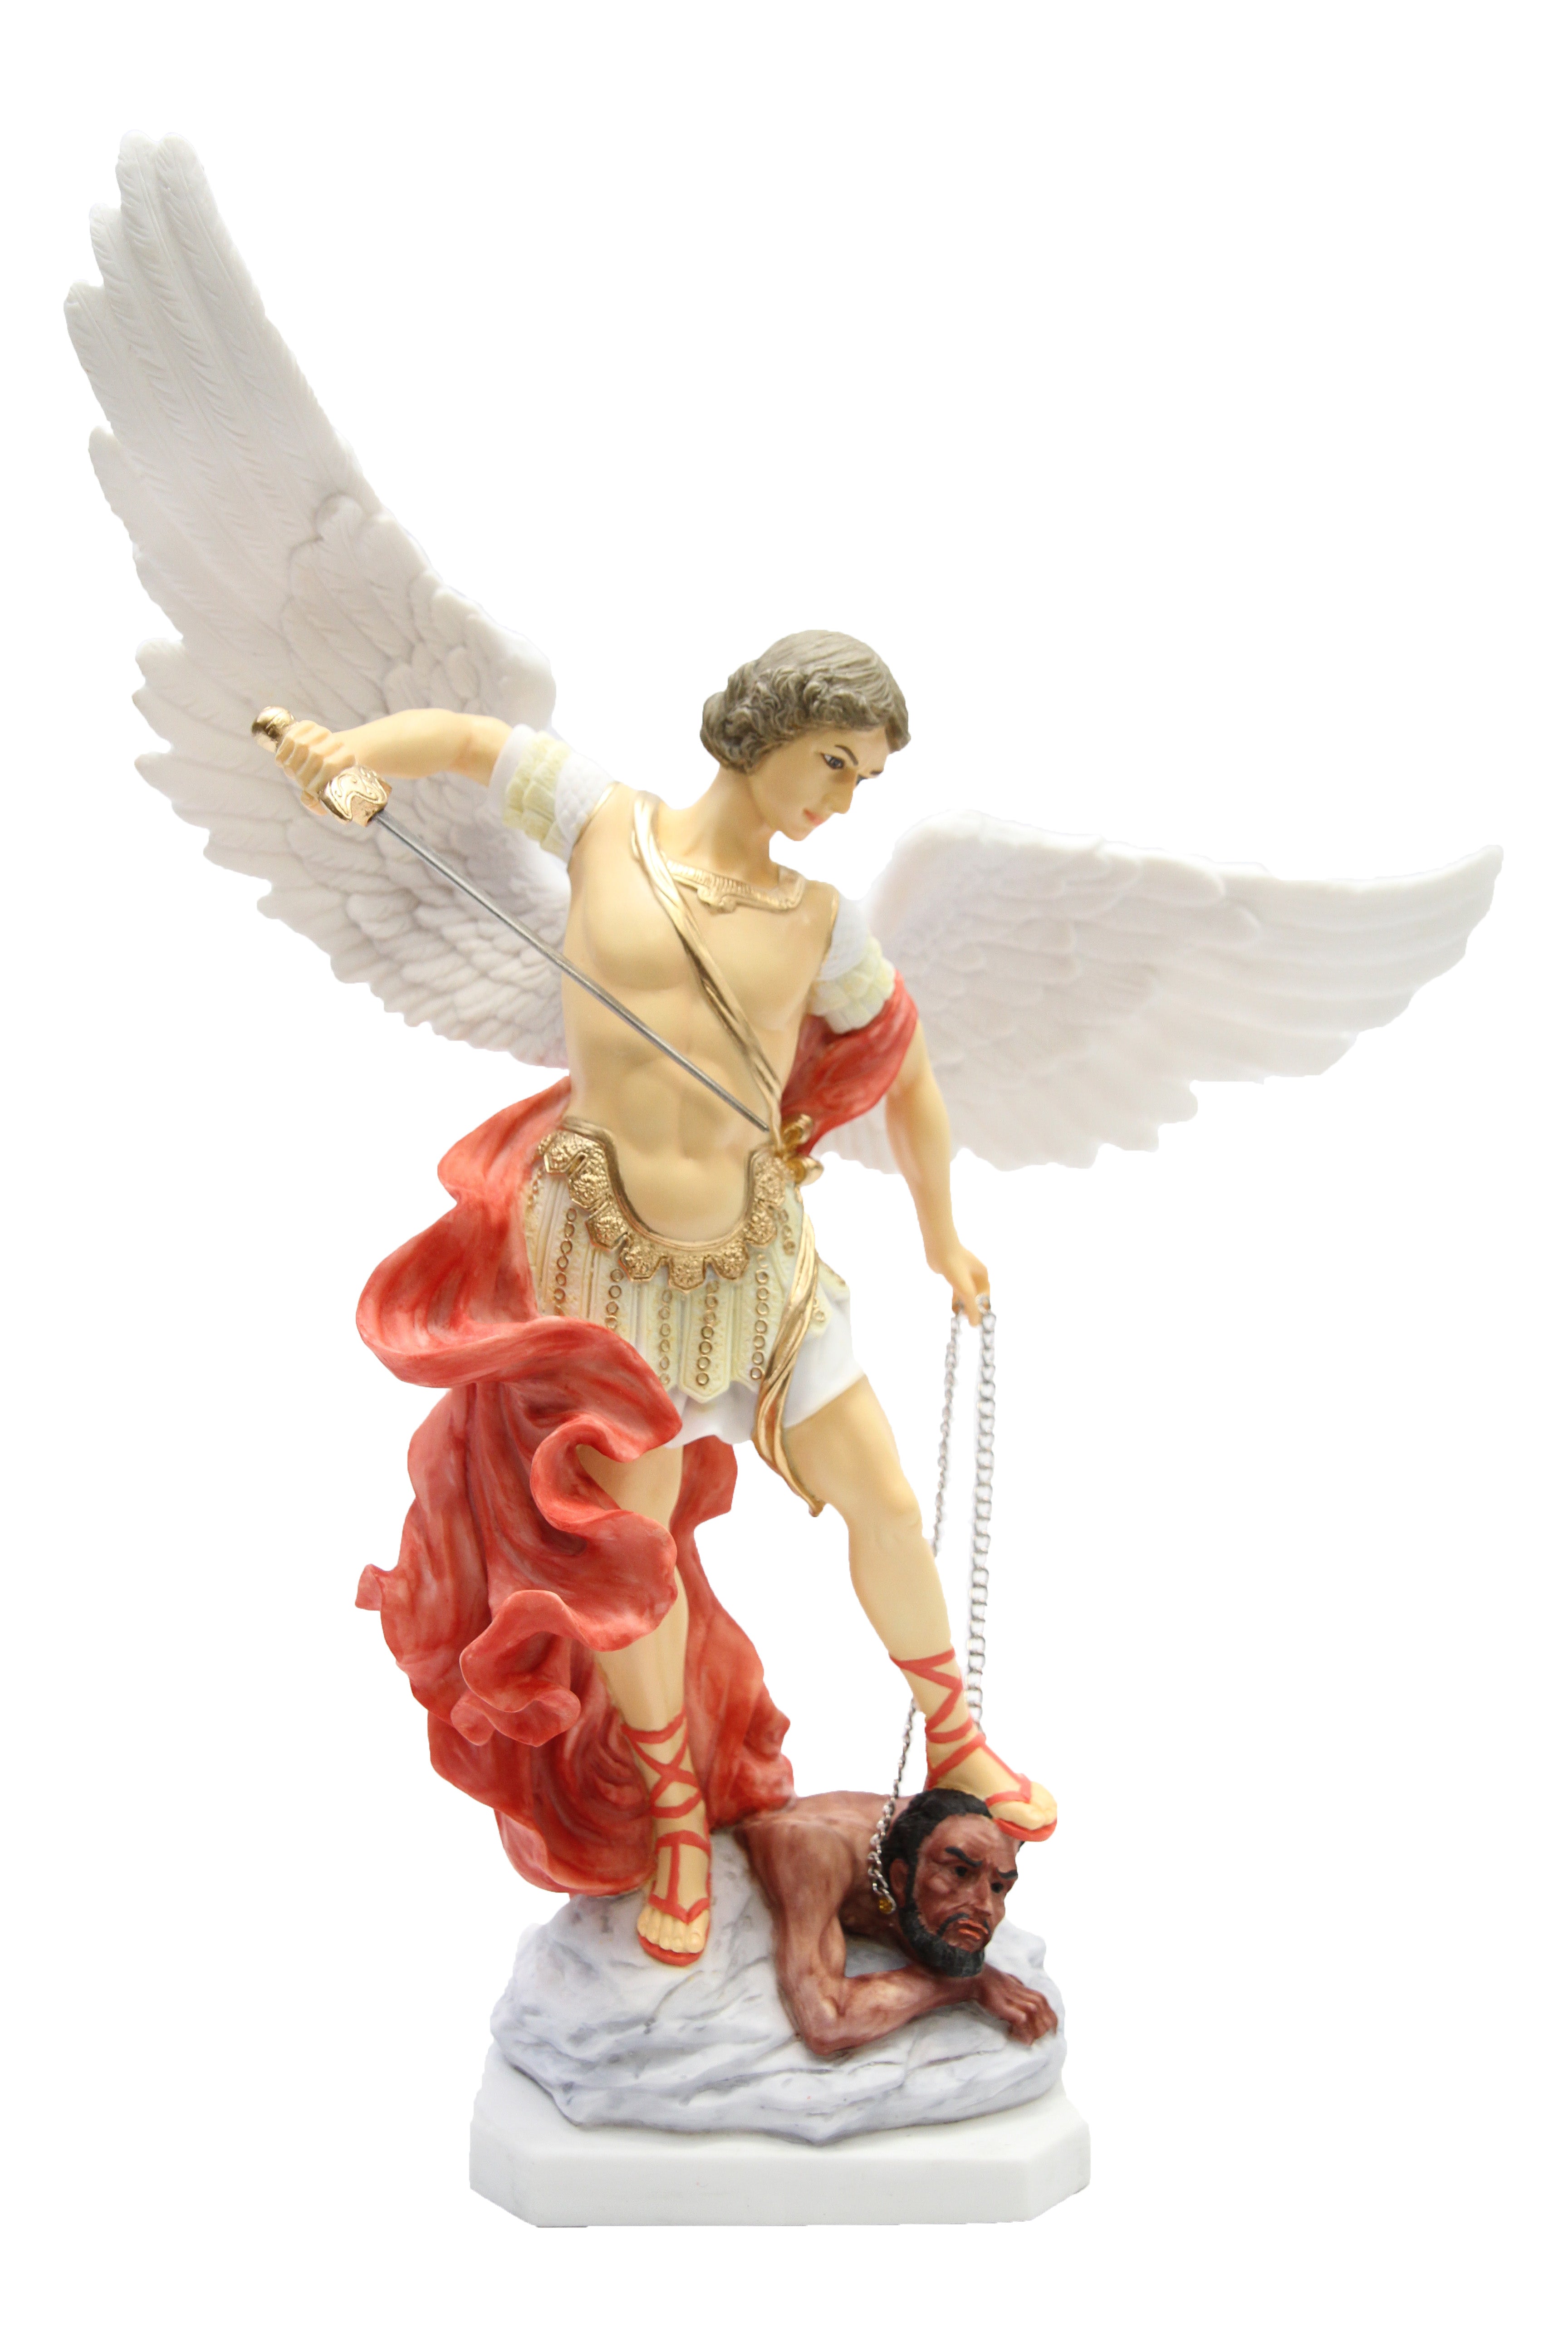 19.25 Inch Saint Michael Archangel Statue Catholic Religious Angel Vittoria Collection Made in Italy